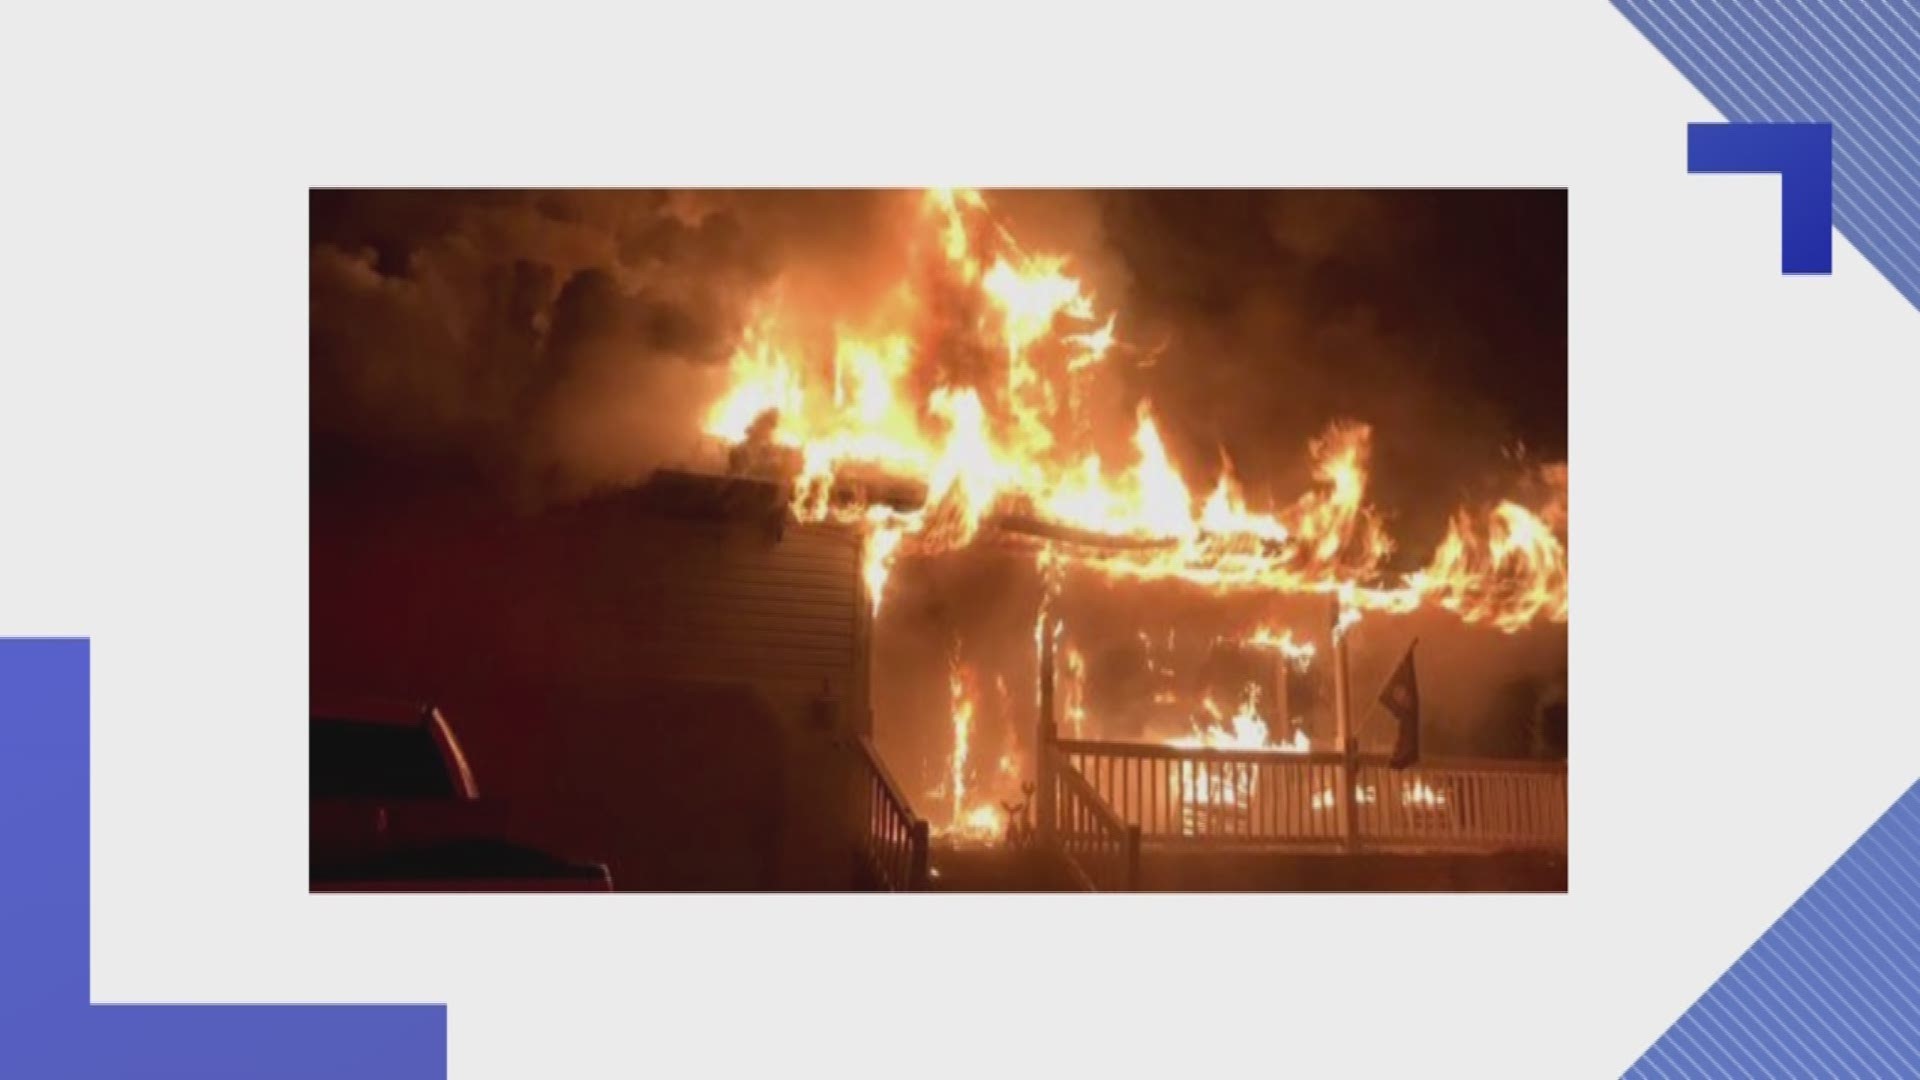 Two people have been displaced following a fire in the Great Bridge area of Chesapeake.